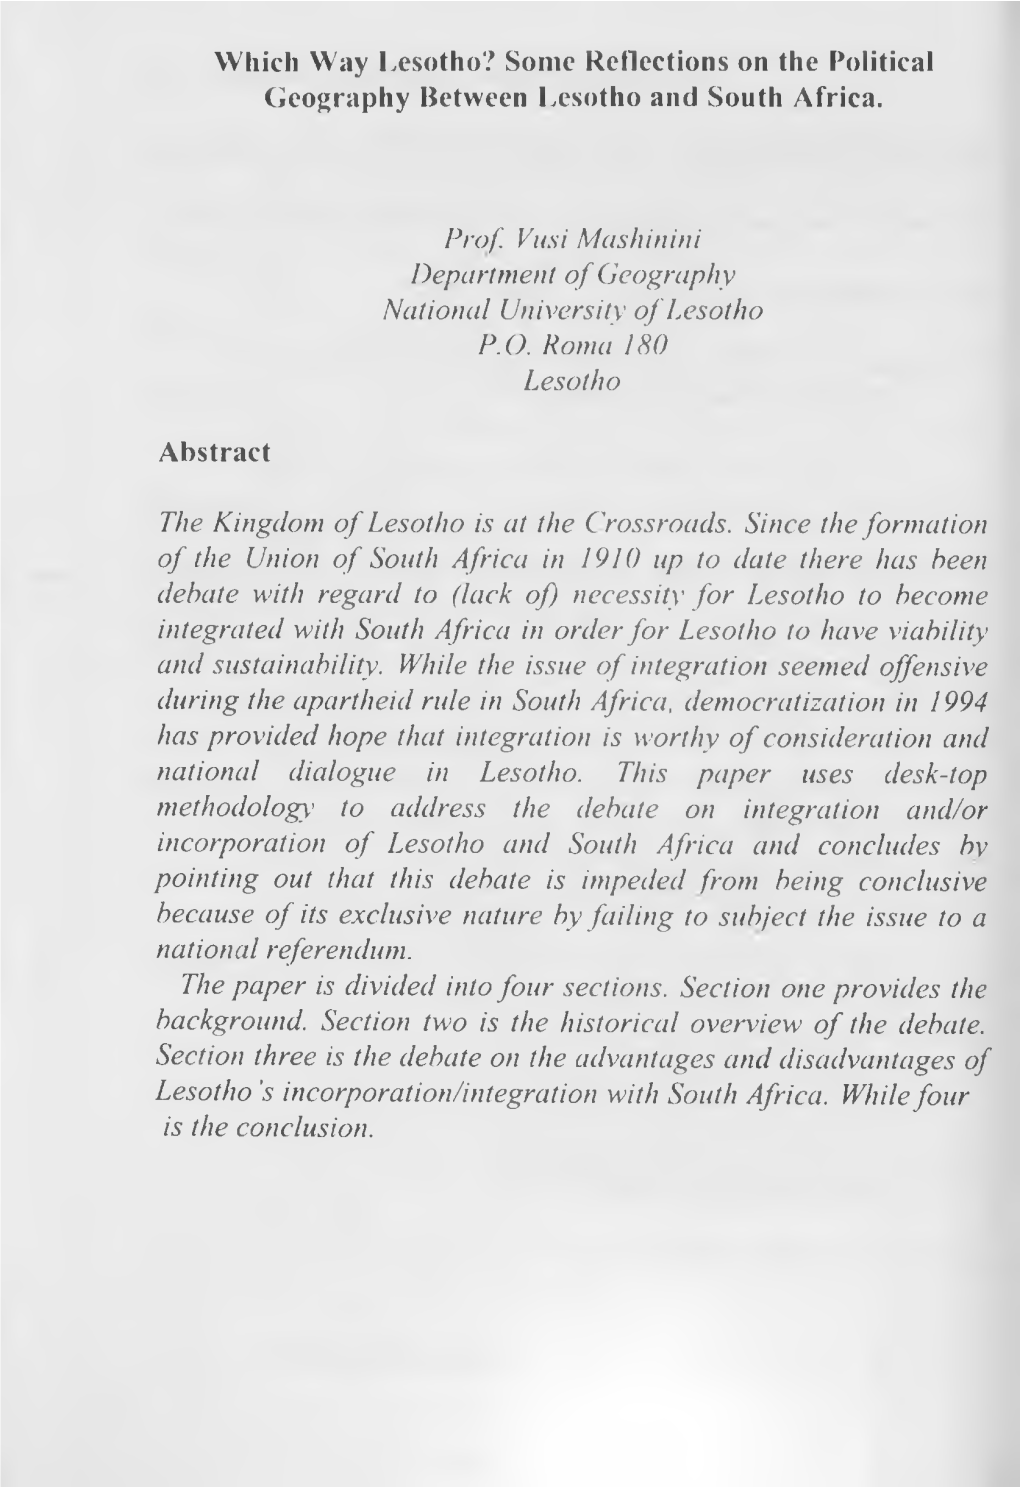 Which Way Lesotho? Some Reflections on the Political Geography Between Lesotho and South Africa